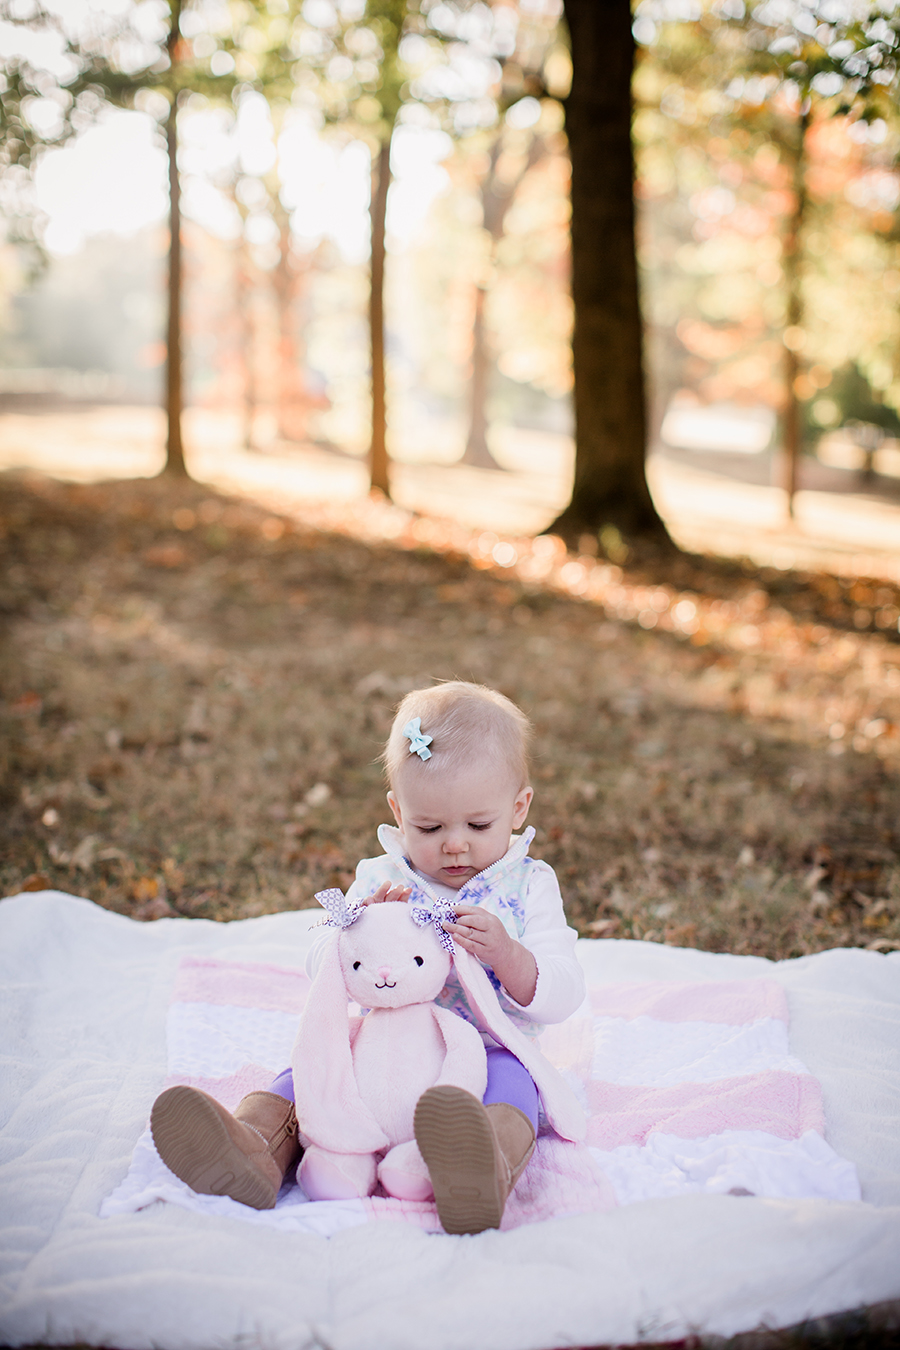 Playing with her bunny by Knoxville Wedding Photographer, Amanda May Photos.